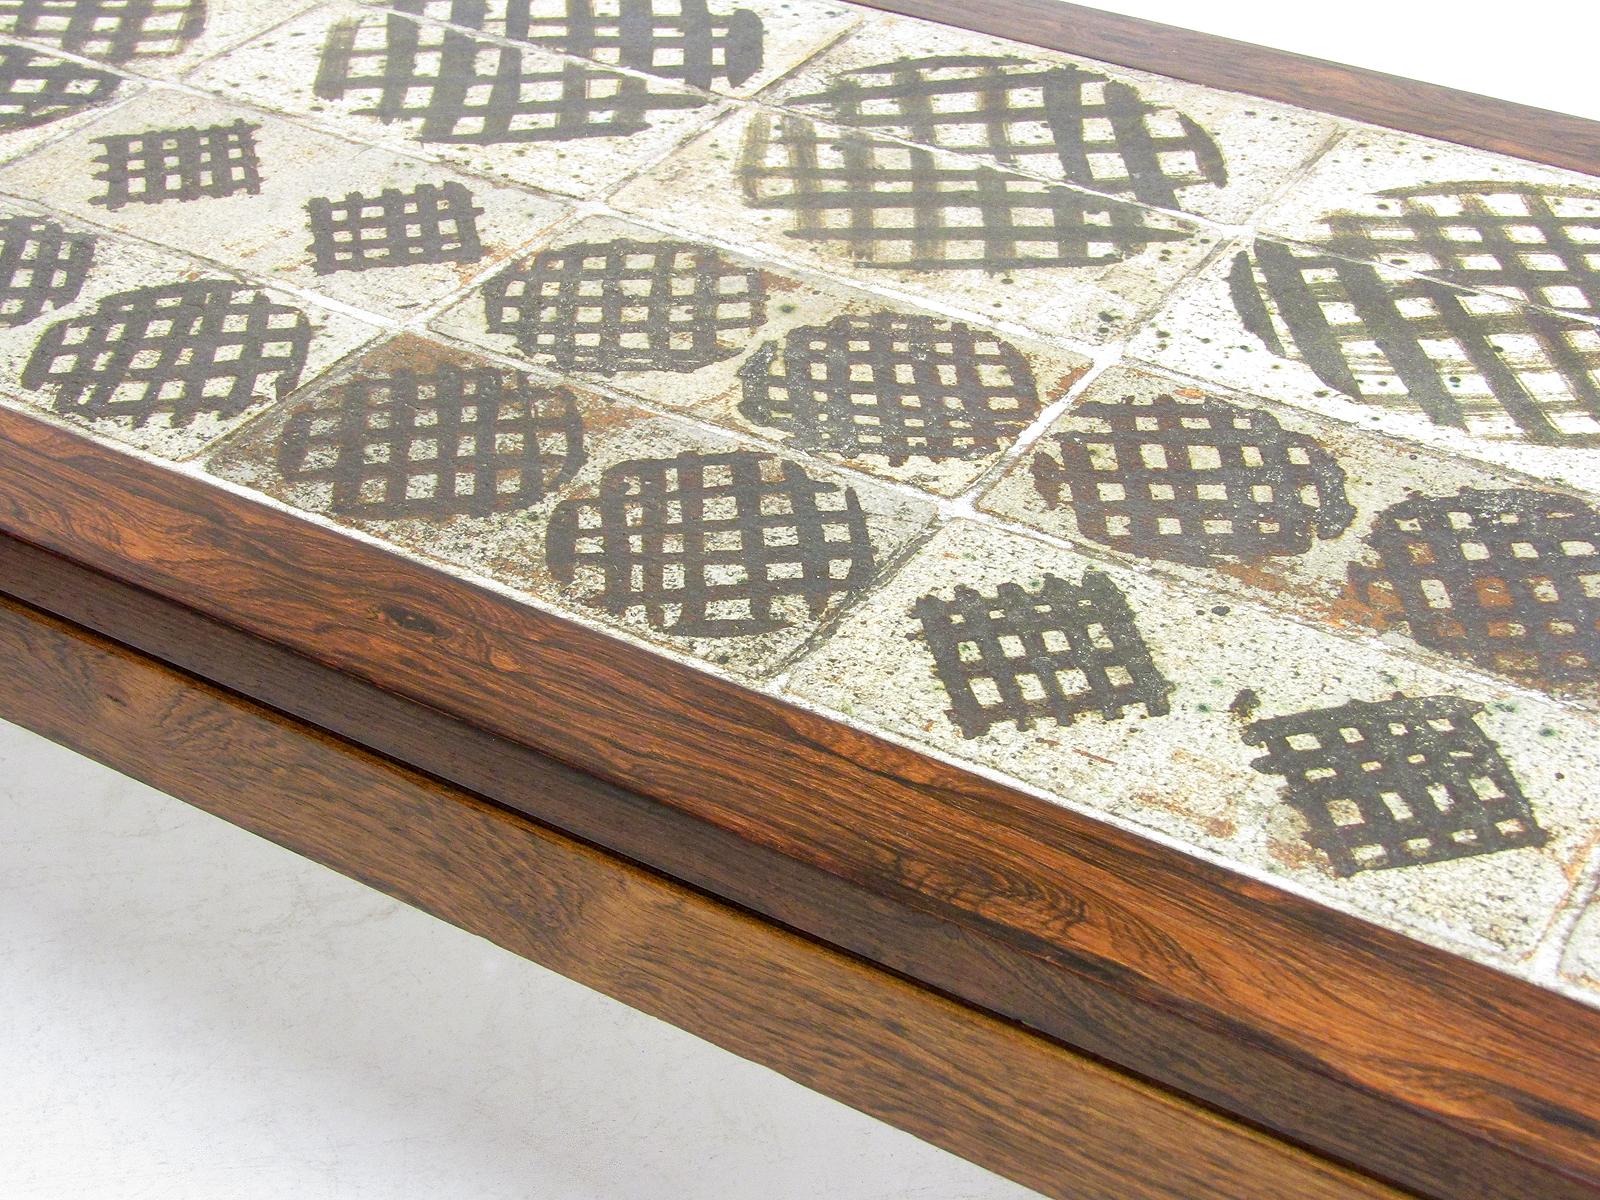 Large 1970s Danish Art Tile Coffee Table in Rosewood by Tue Poulsen & Eric Wörtz 1